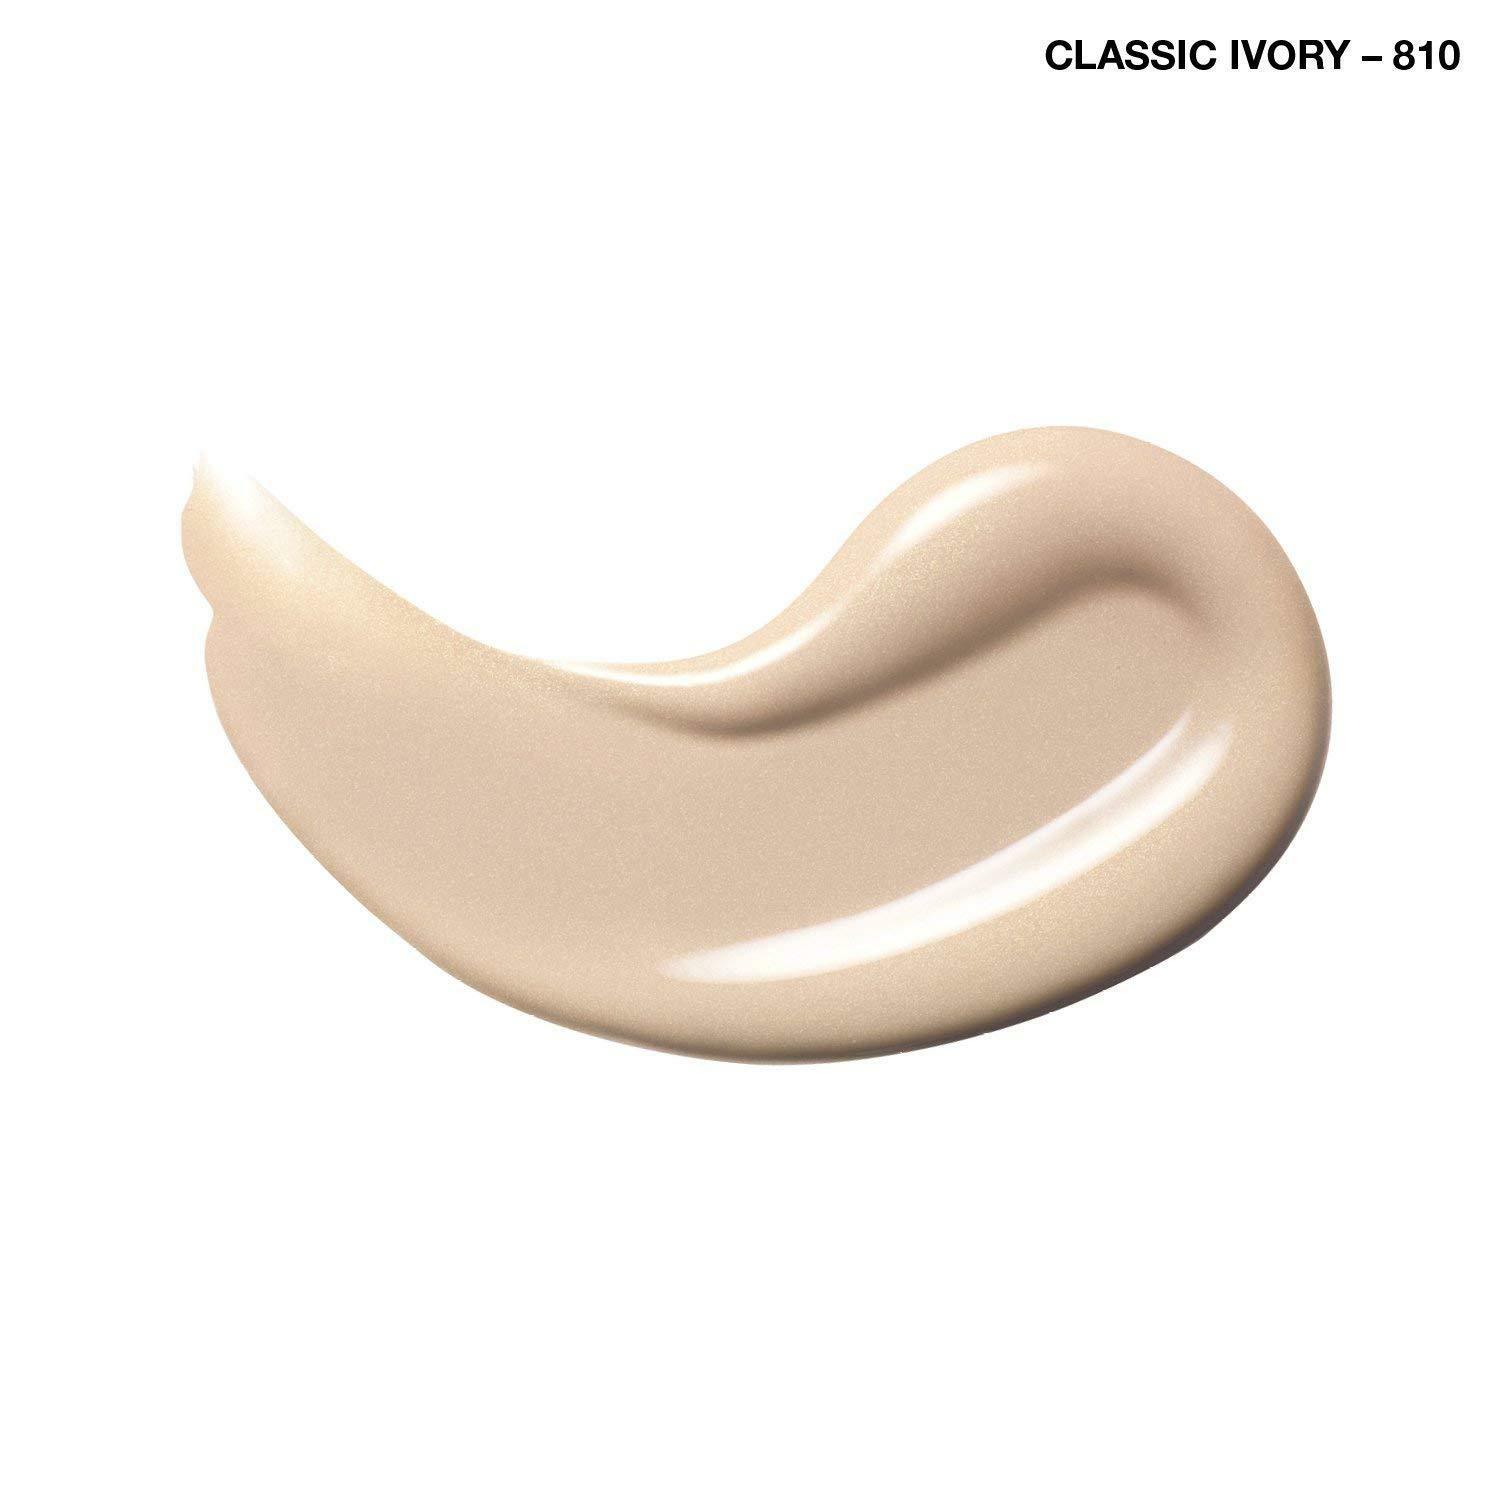 Outlast Stay Luminous Foundation #810 Classic Ivory